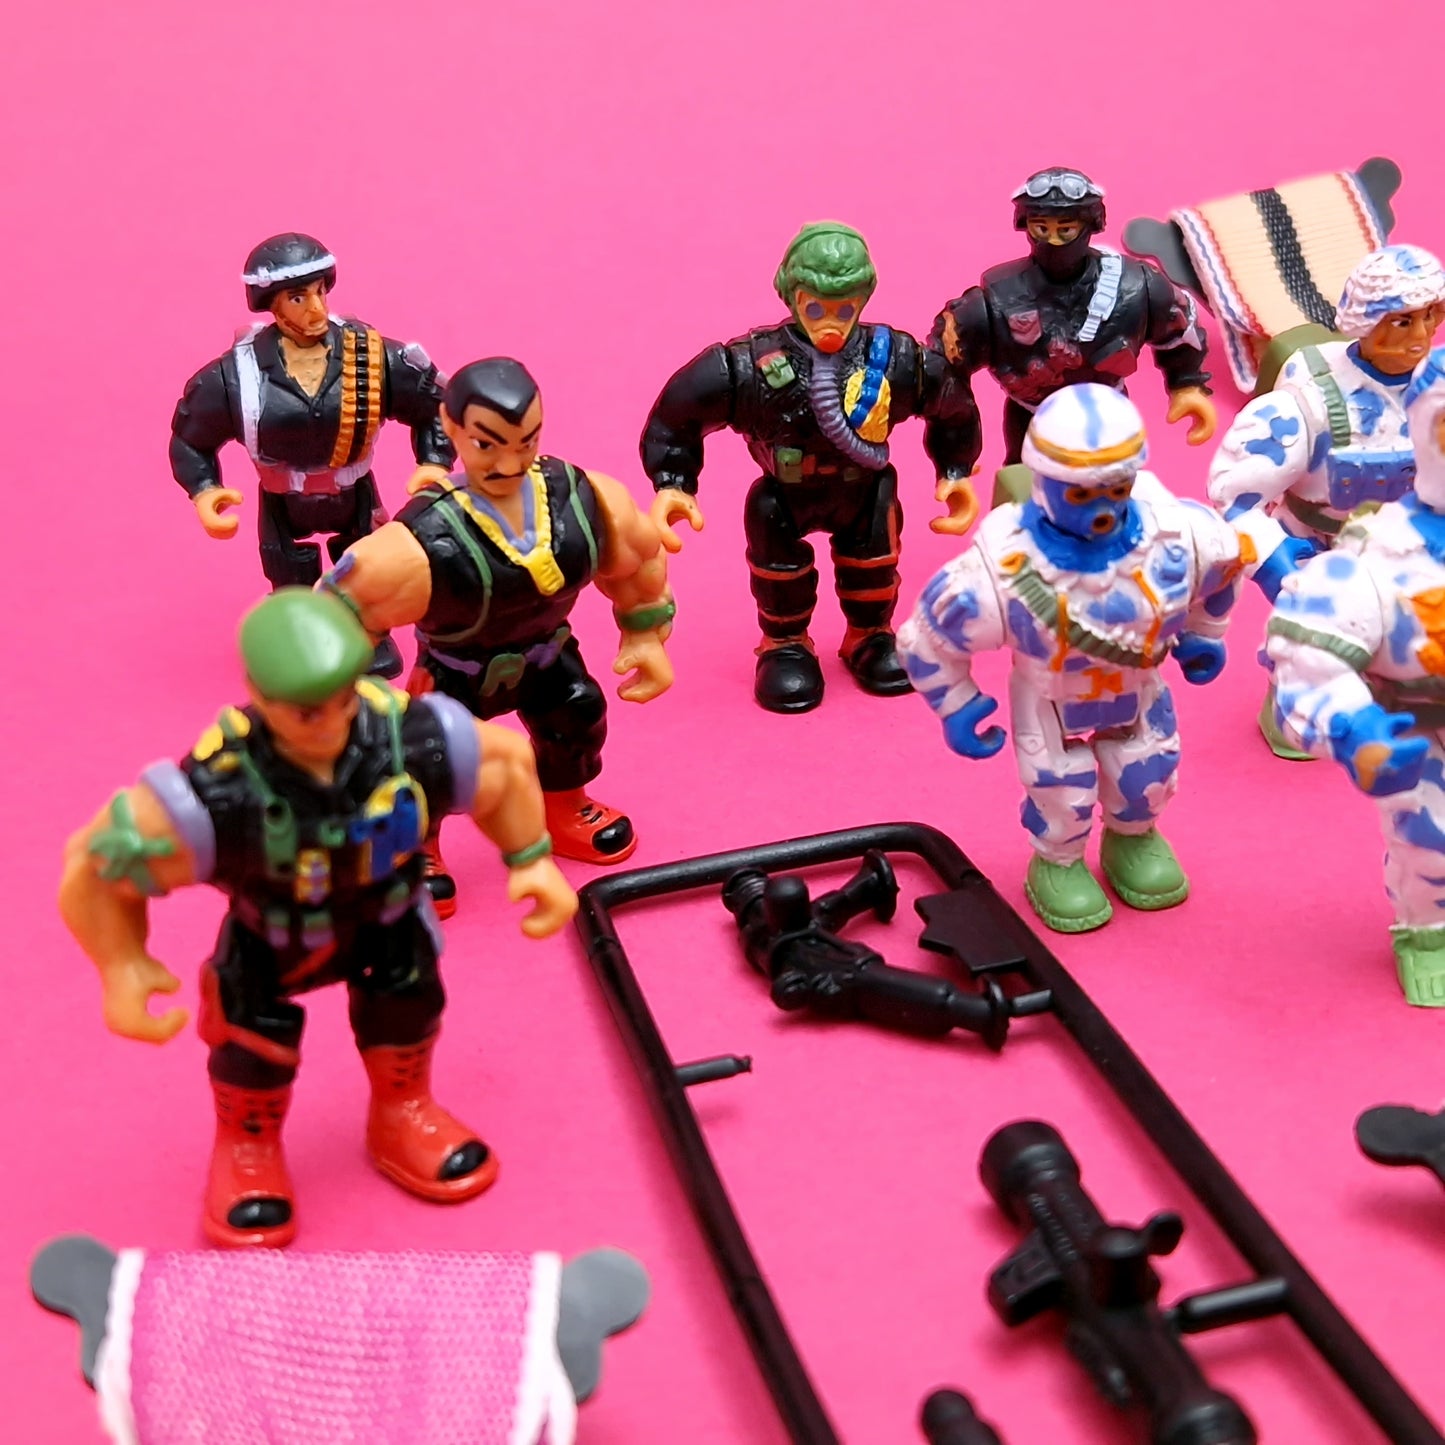 MILITARY MUSCLE MEN☆ Bundle of 14 Figures and Accessories Vintage ☆ 90s Original San Francisco Toymakers